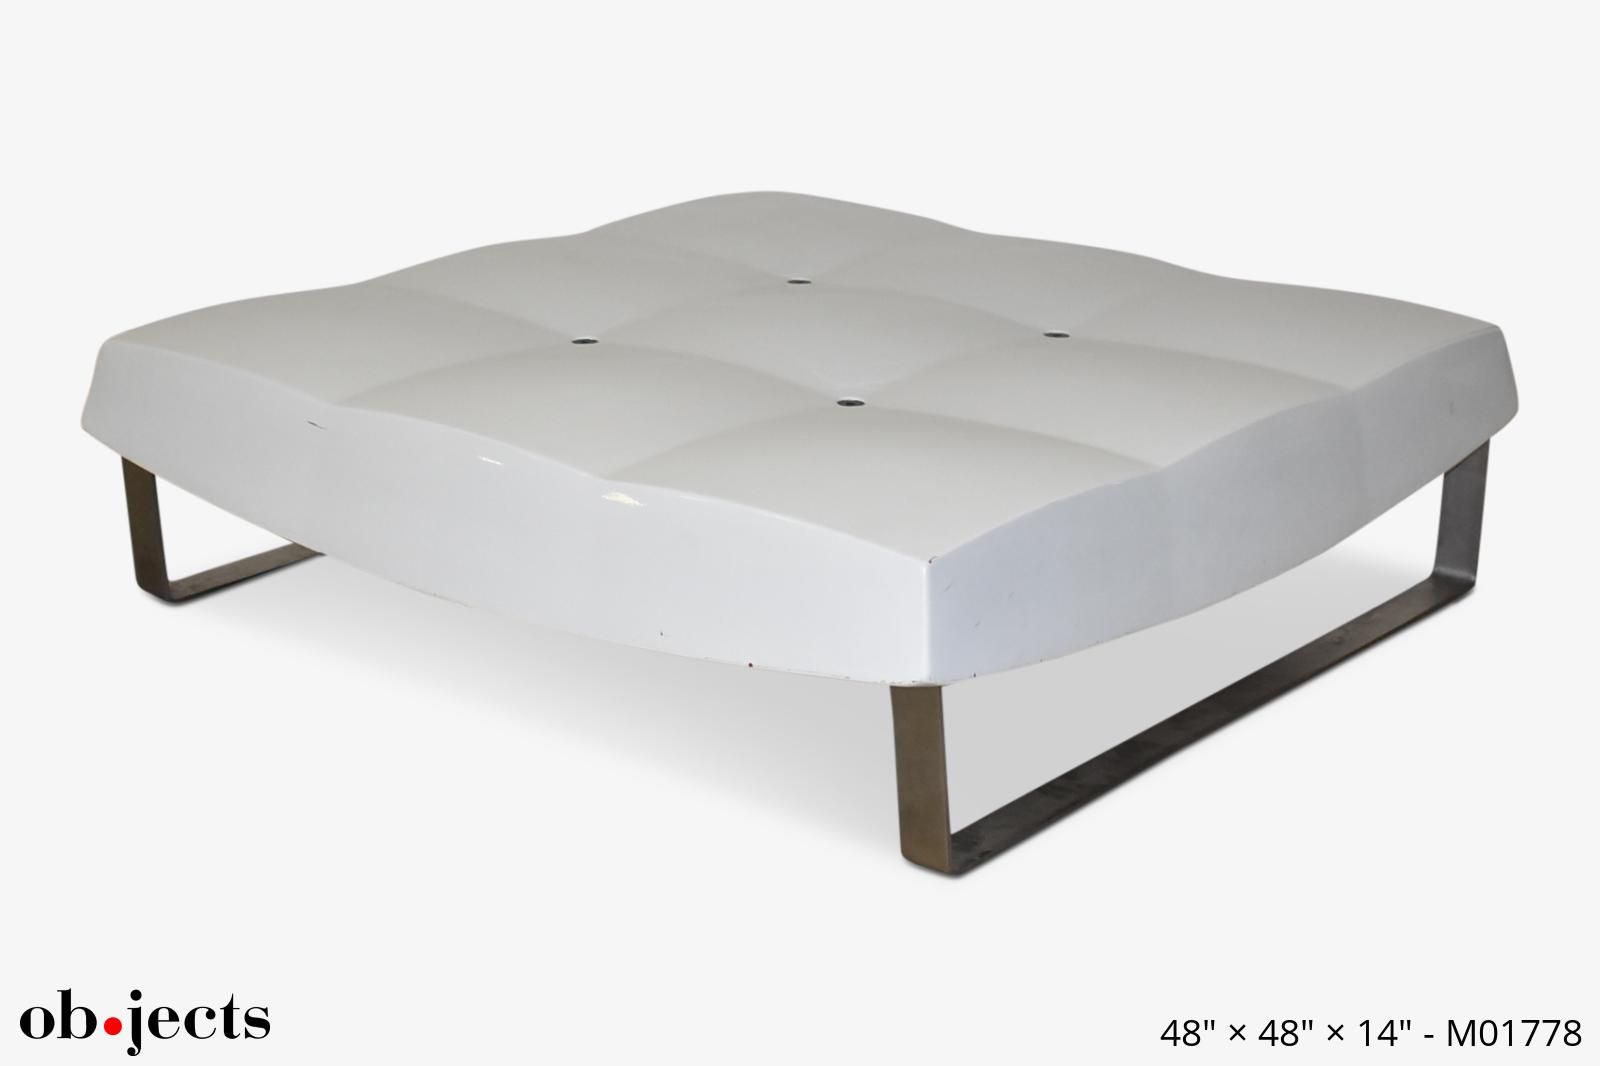 Ottoman Tufted White Lacquered | Ob•jects Throughout White Lacquer Ottomans (View 2 of 15)